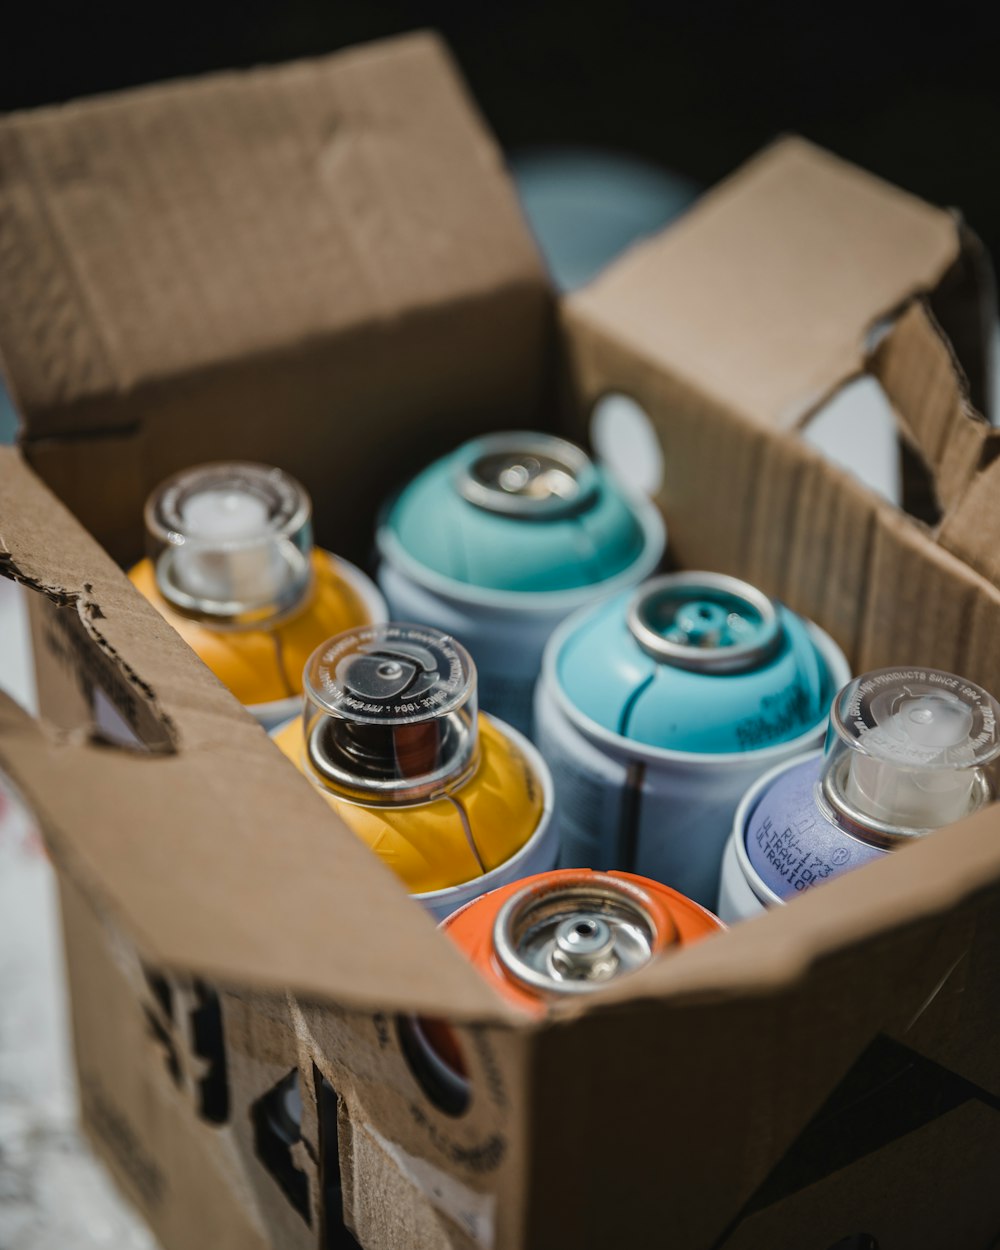 blue and orange cans on brown cardboard box